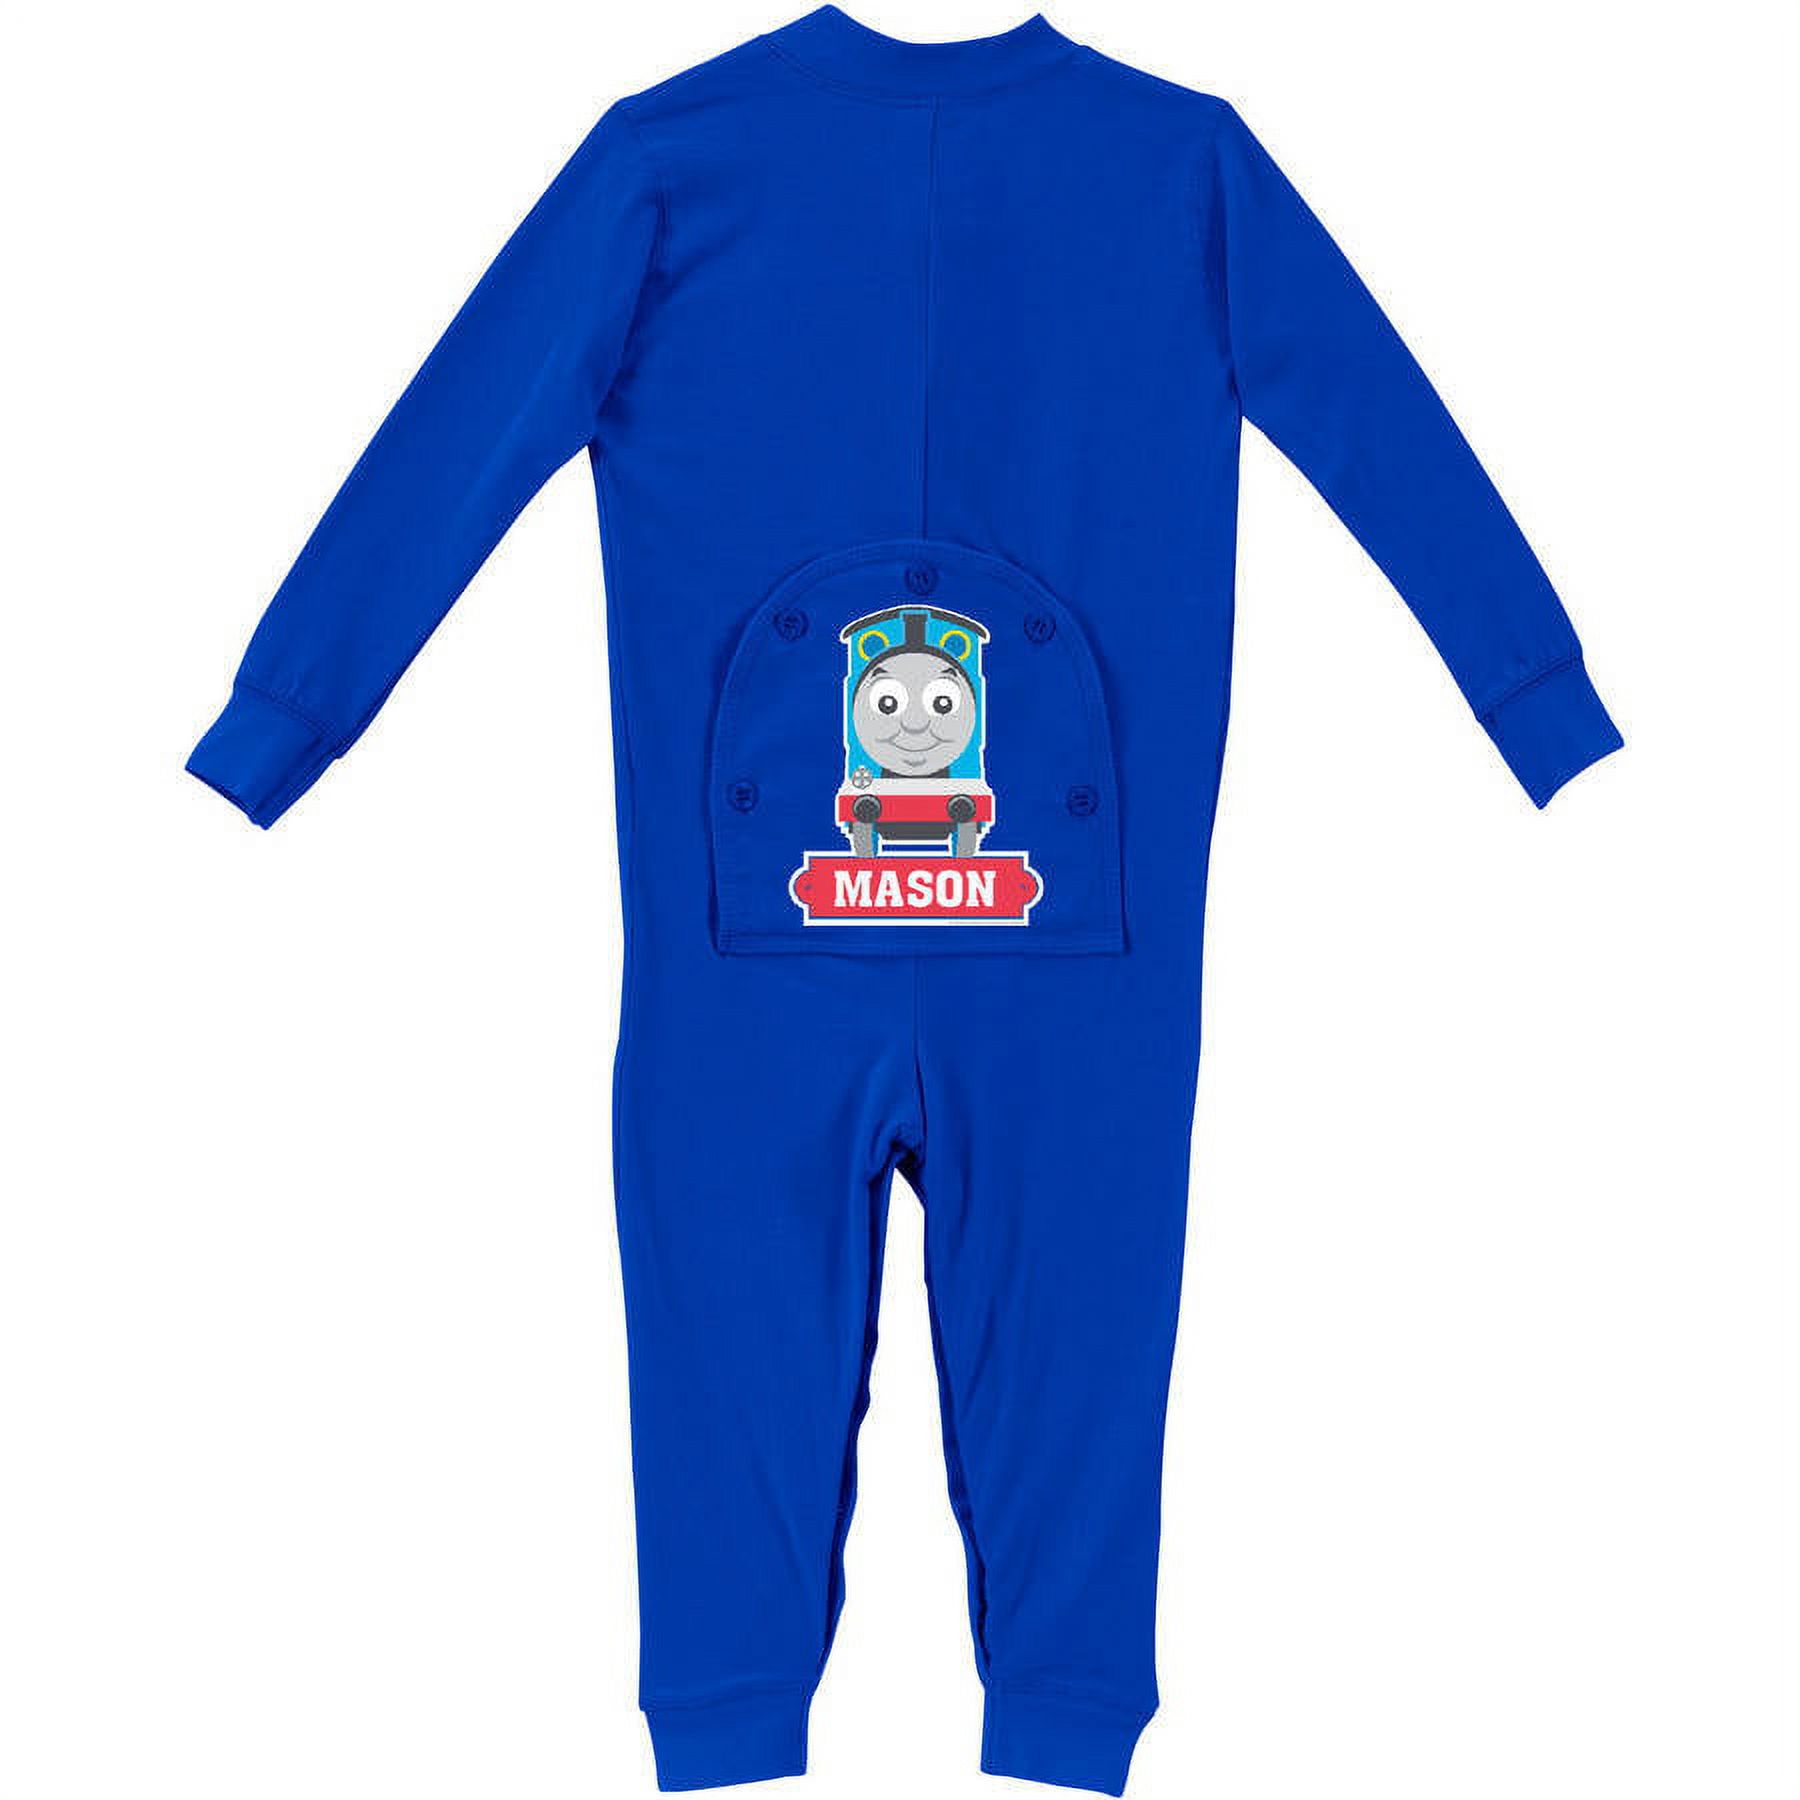 Personalized Thomas and Friends Infant Boy's Blue Playwear - image 1 of 1